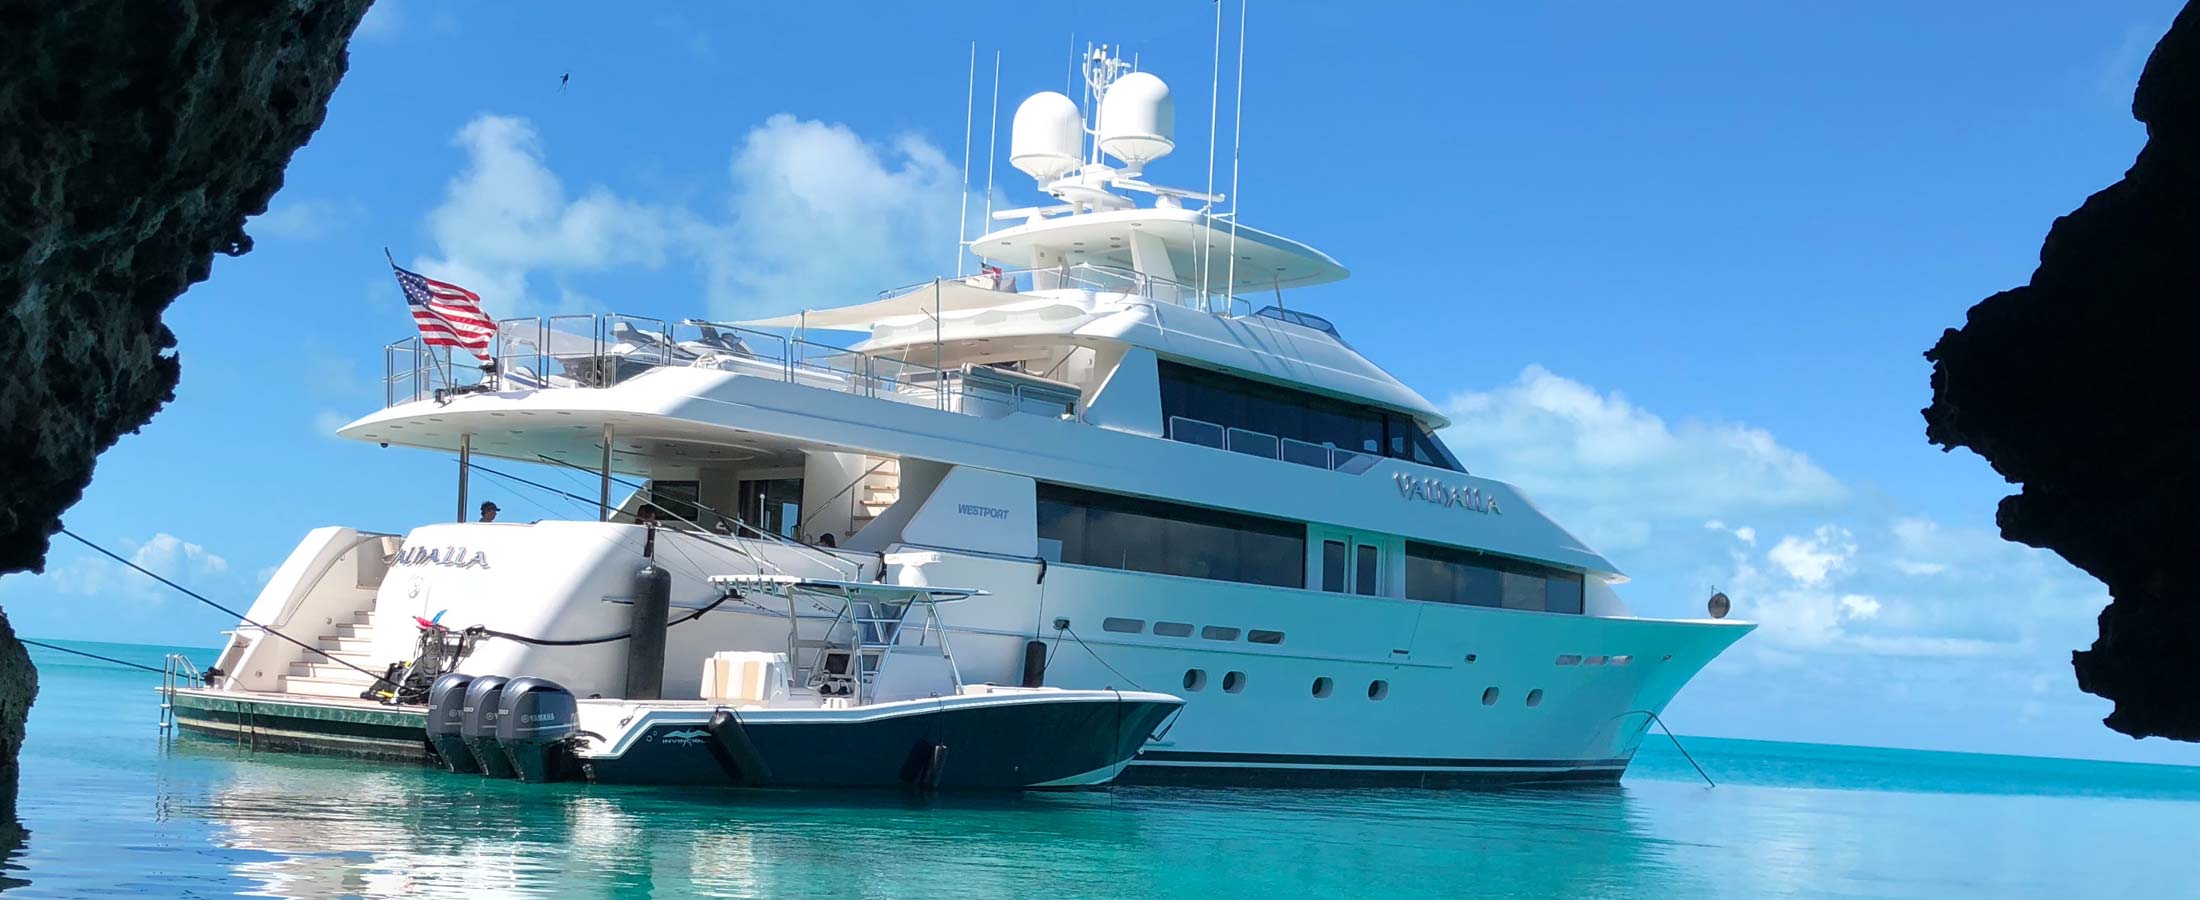 Central Yacht Services| List Your Yacht with Westport | Yachts Marketing